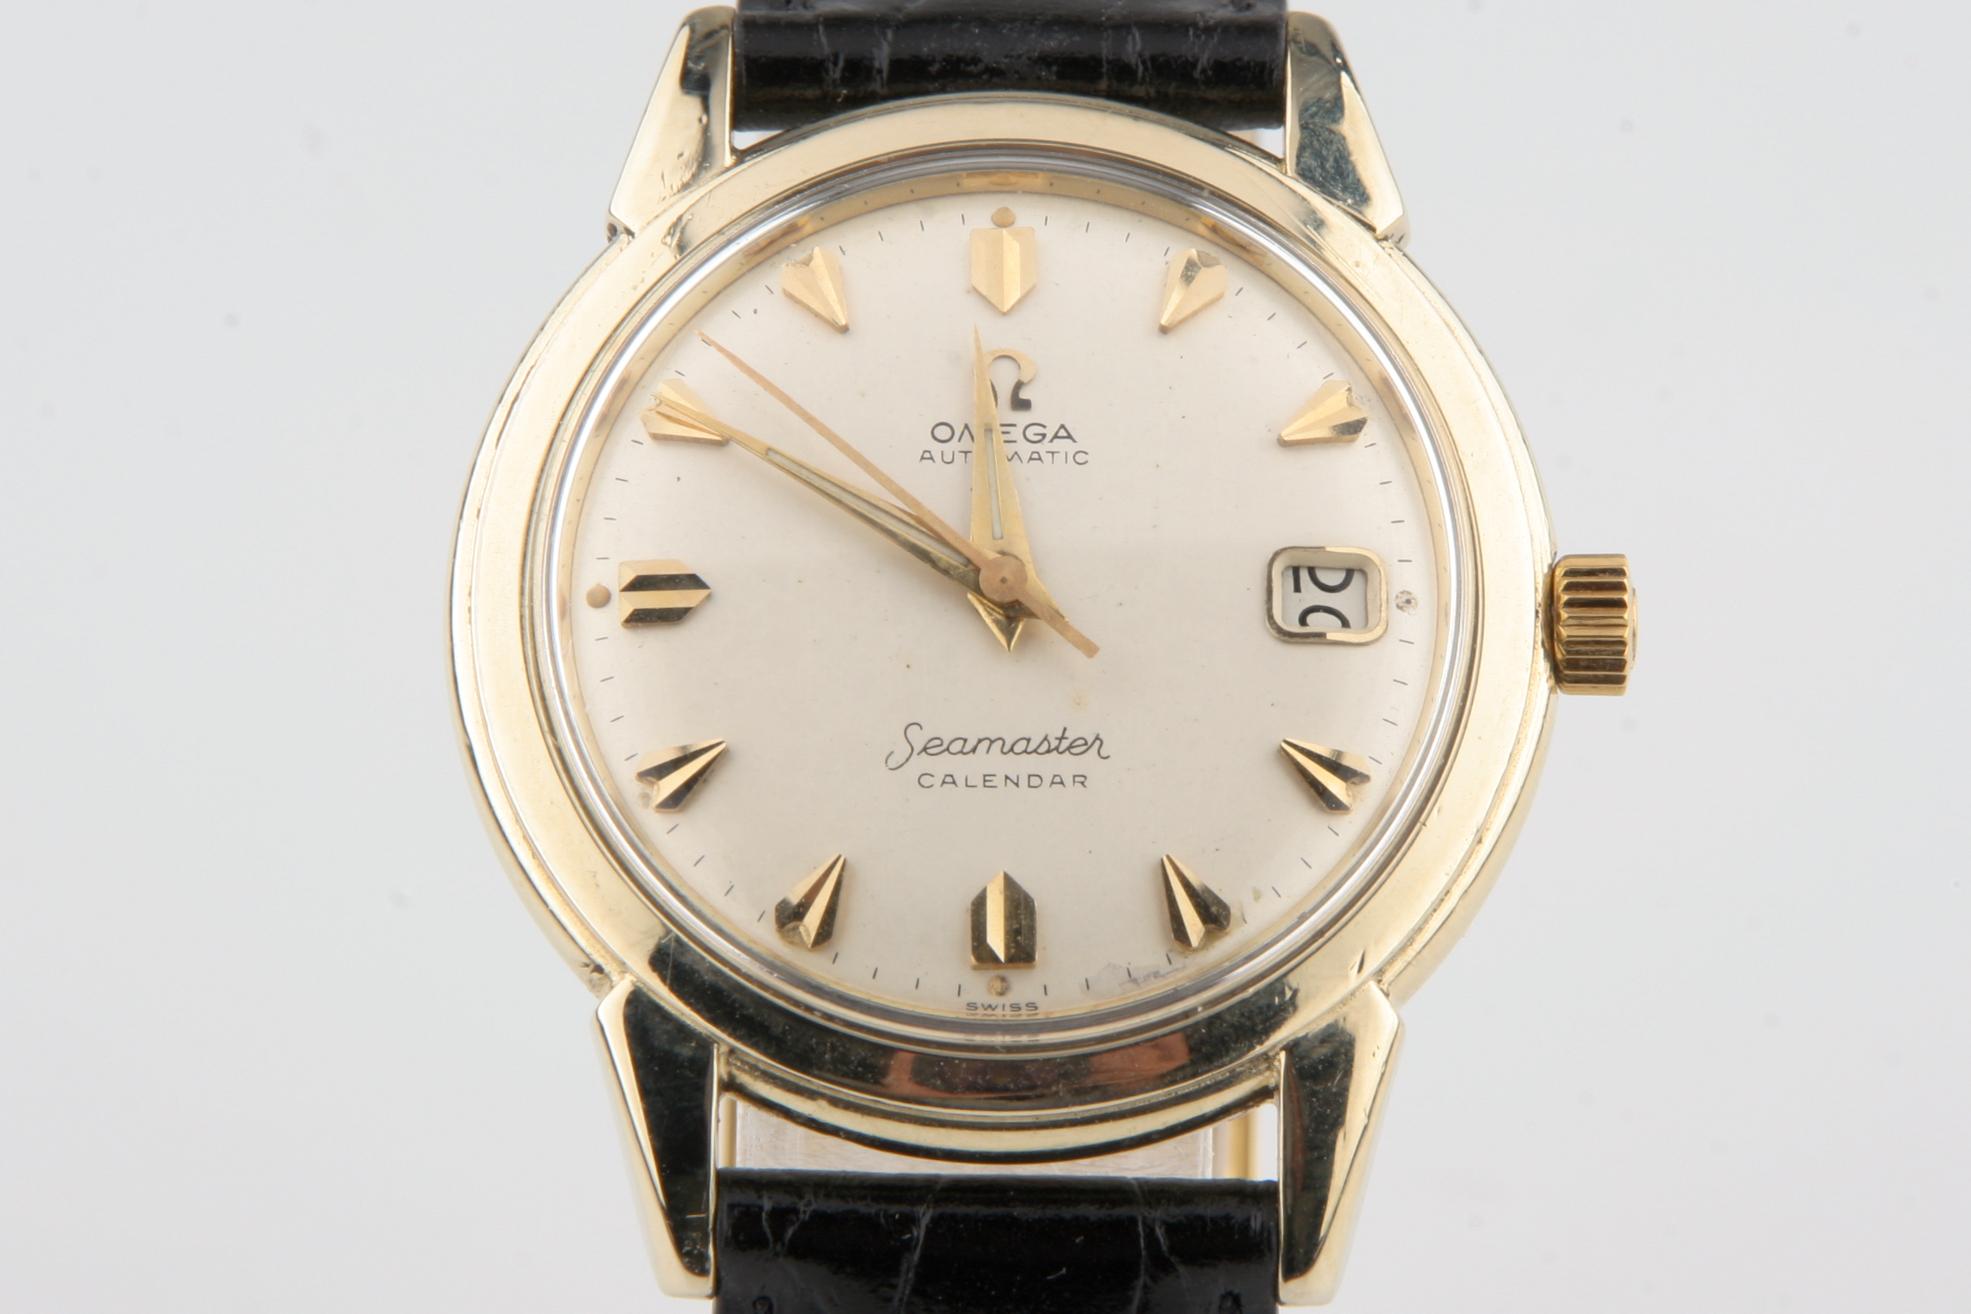 Vintage Omega Ω Men's Seamaster Calendar Automatic 14k Gold Filled Watch w/ Date

Movement #502.16043765
Case #KX6275.D70767

14k Gold Filled Case
35 mm in Diameter (37 mm w/ Crown)
Lug-to-Lug Distance = 42 mm
Thickness = 10 mm

Champagne Dial with